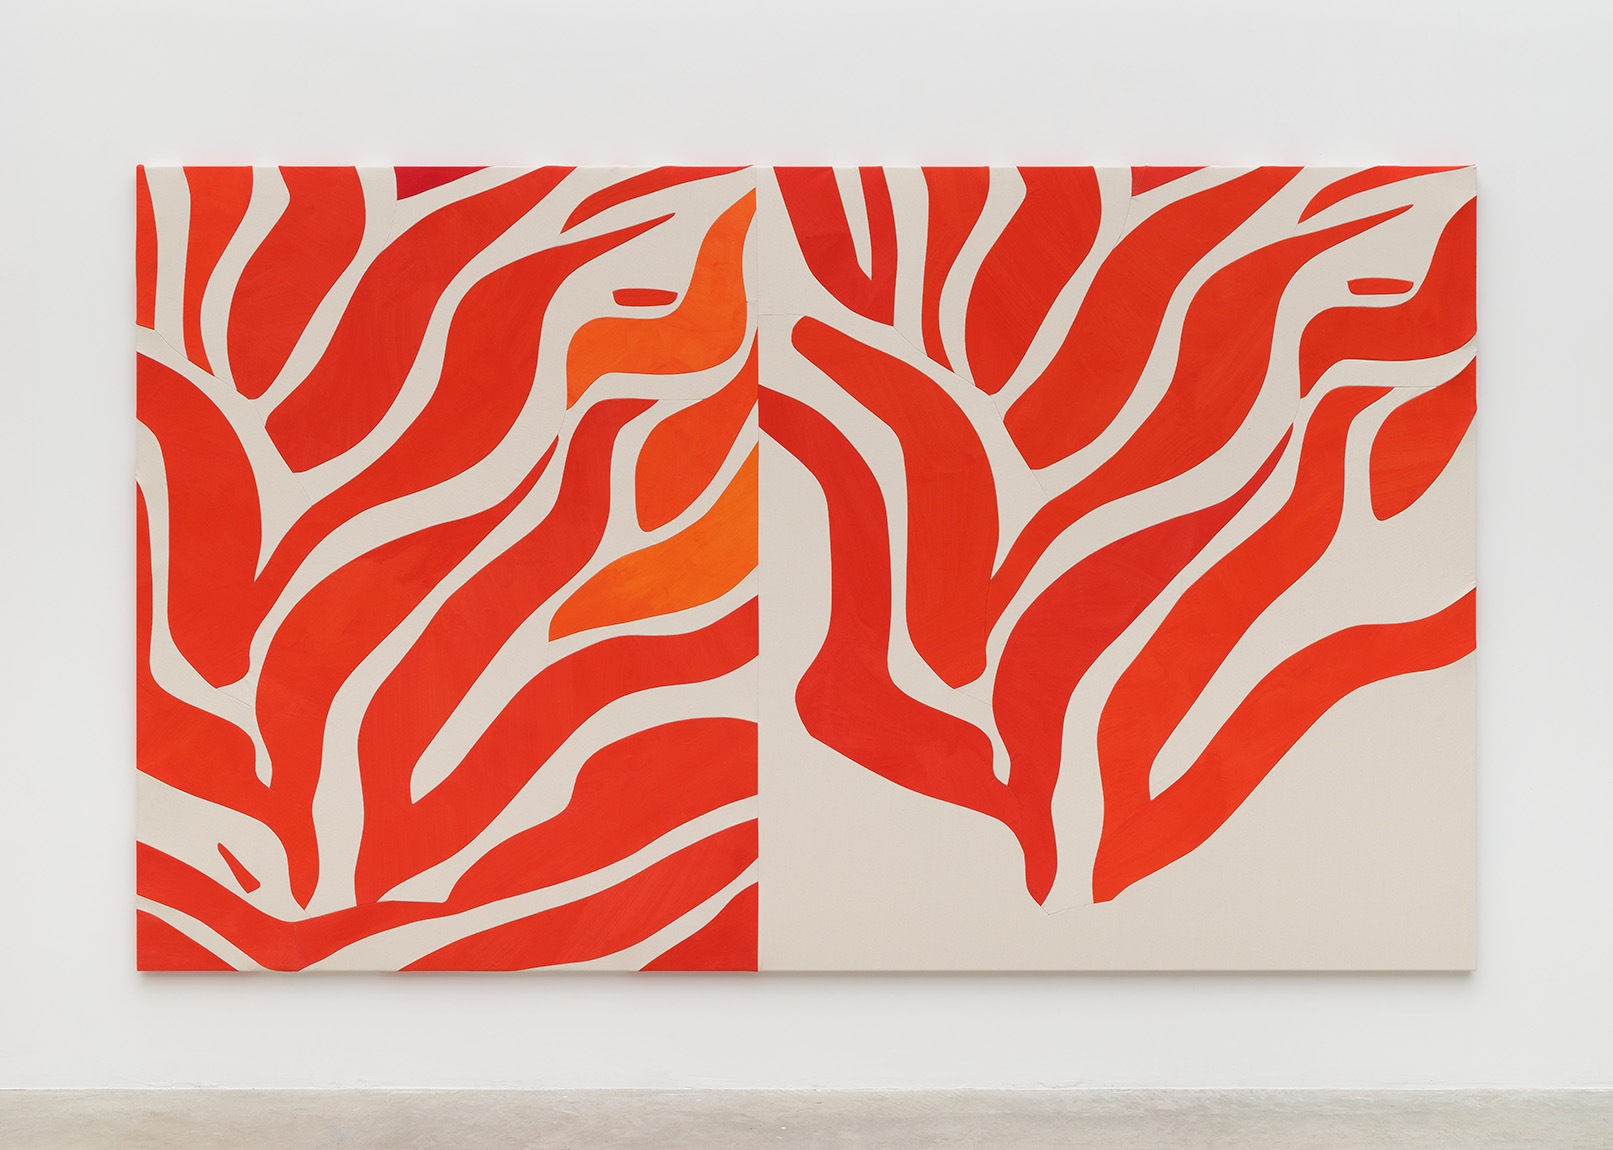 Bright orange abstract painting by artist Sarah Crowner